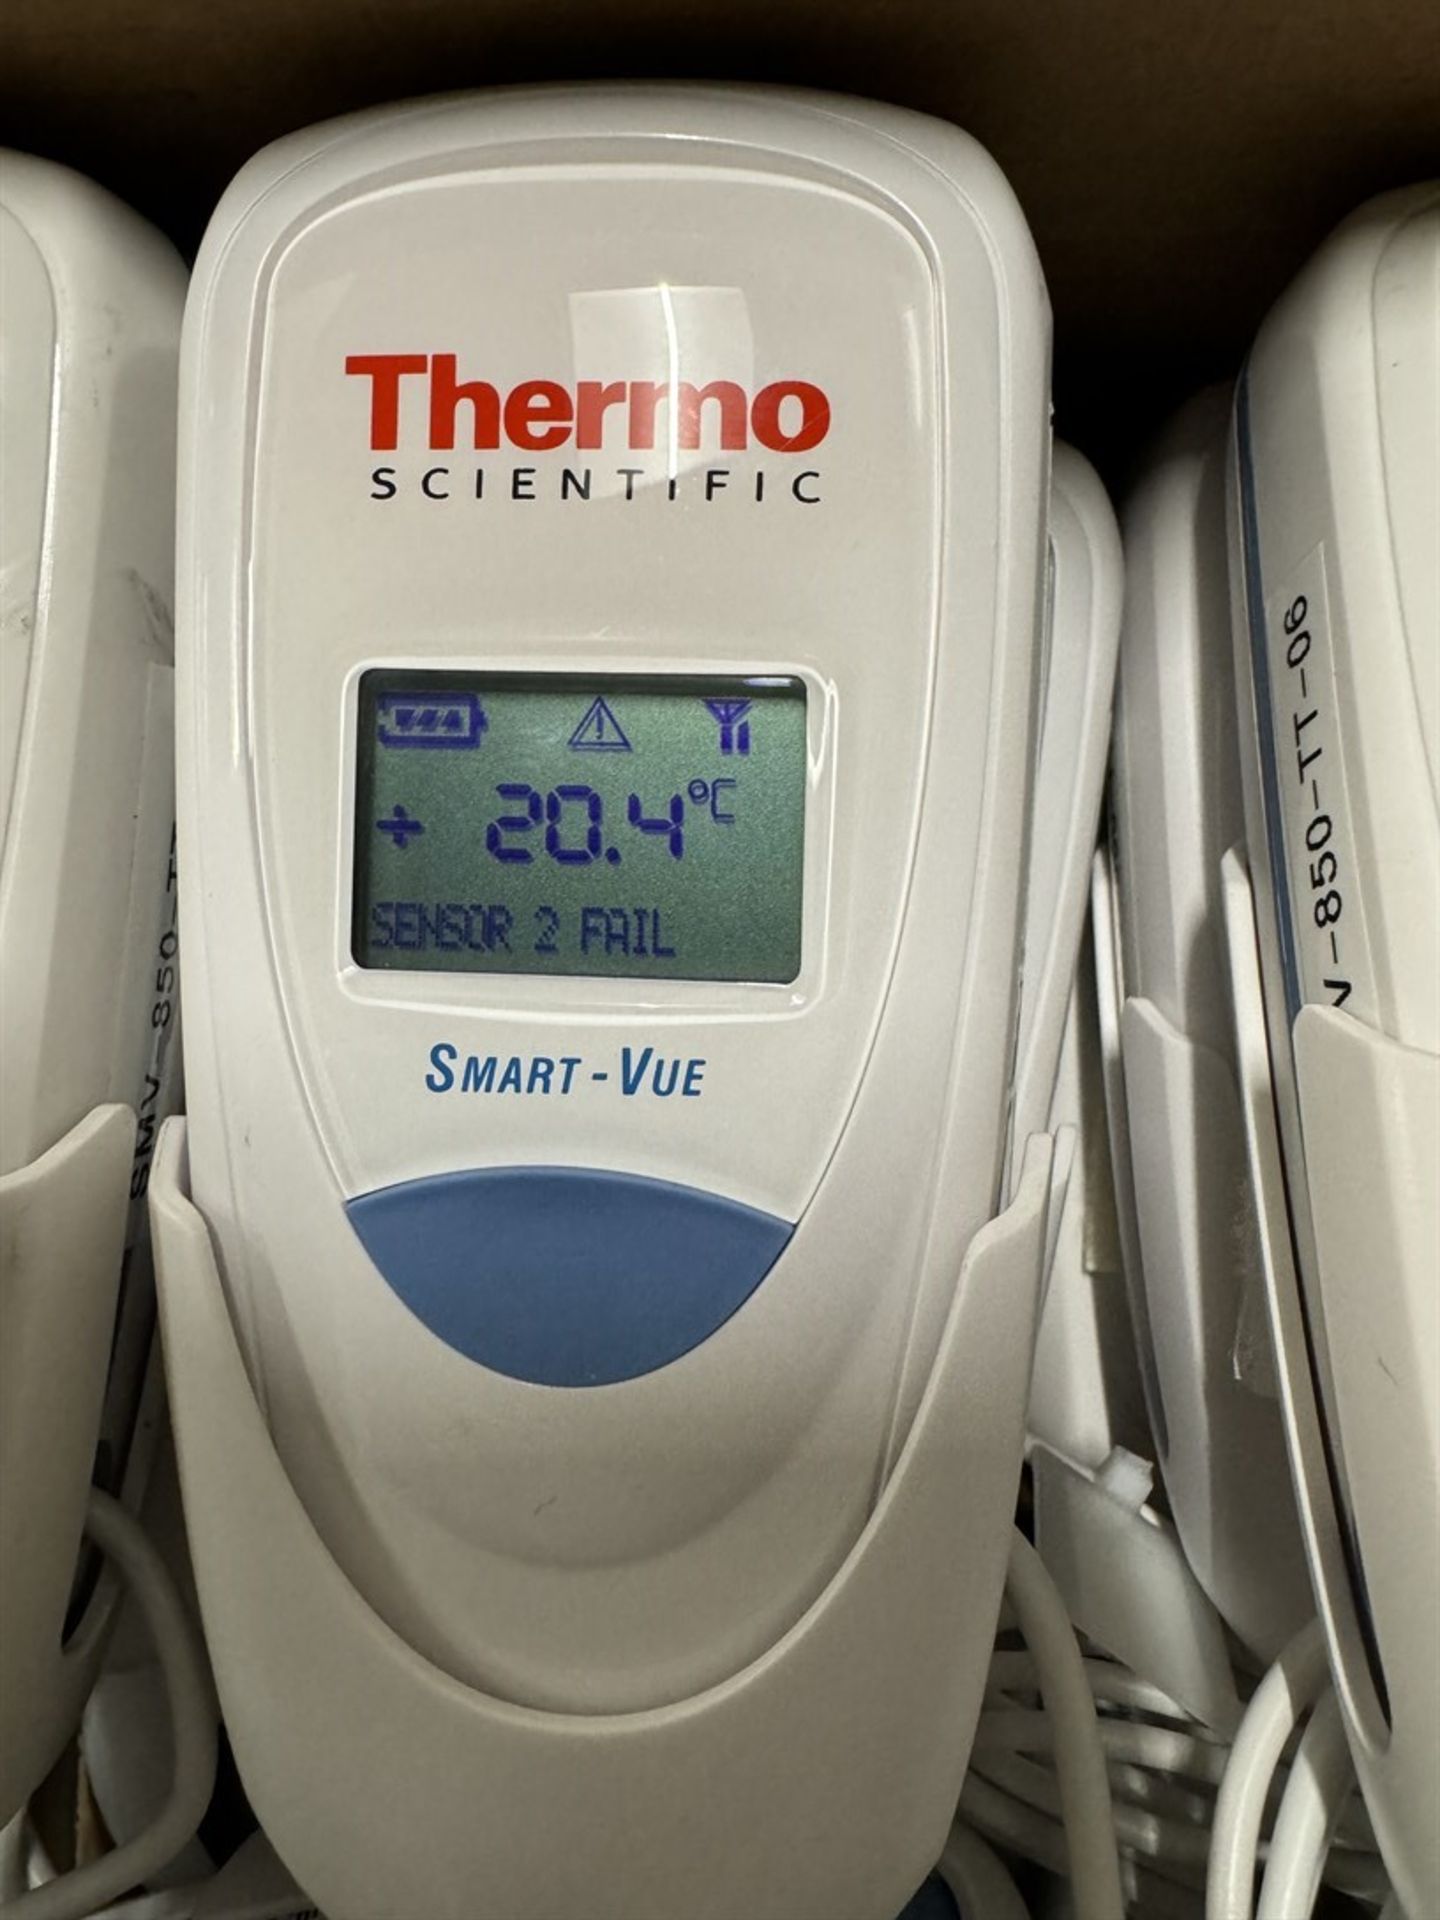 (22) THERMO SCIENTIFIC Smart Vue Remote Monitoring System - Image 7 of 8